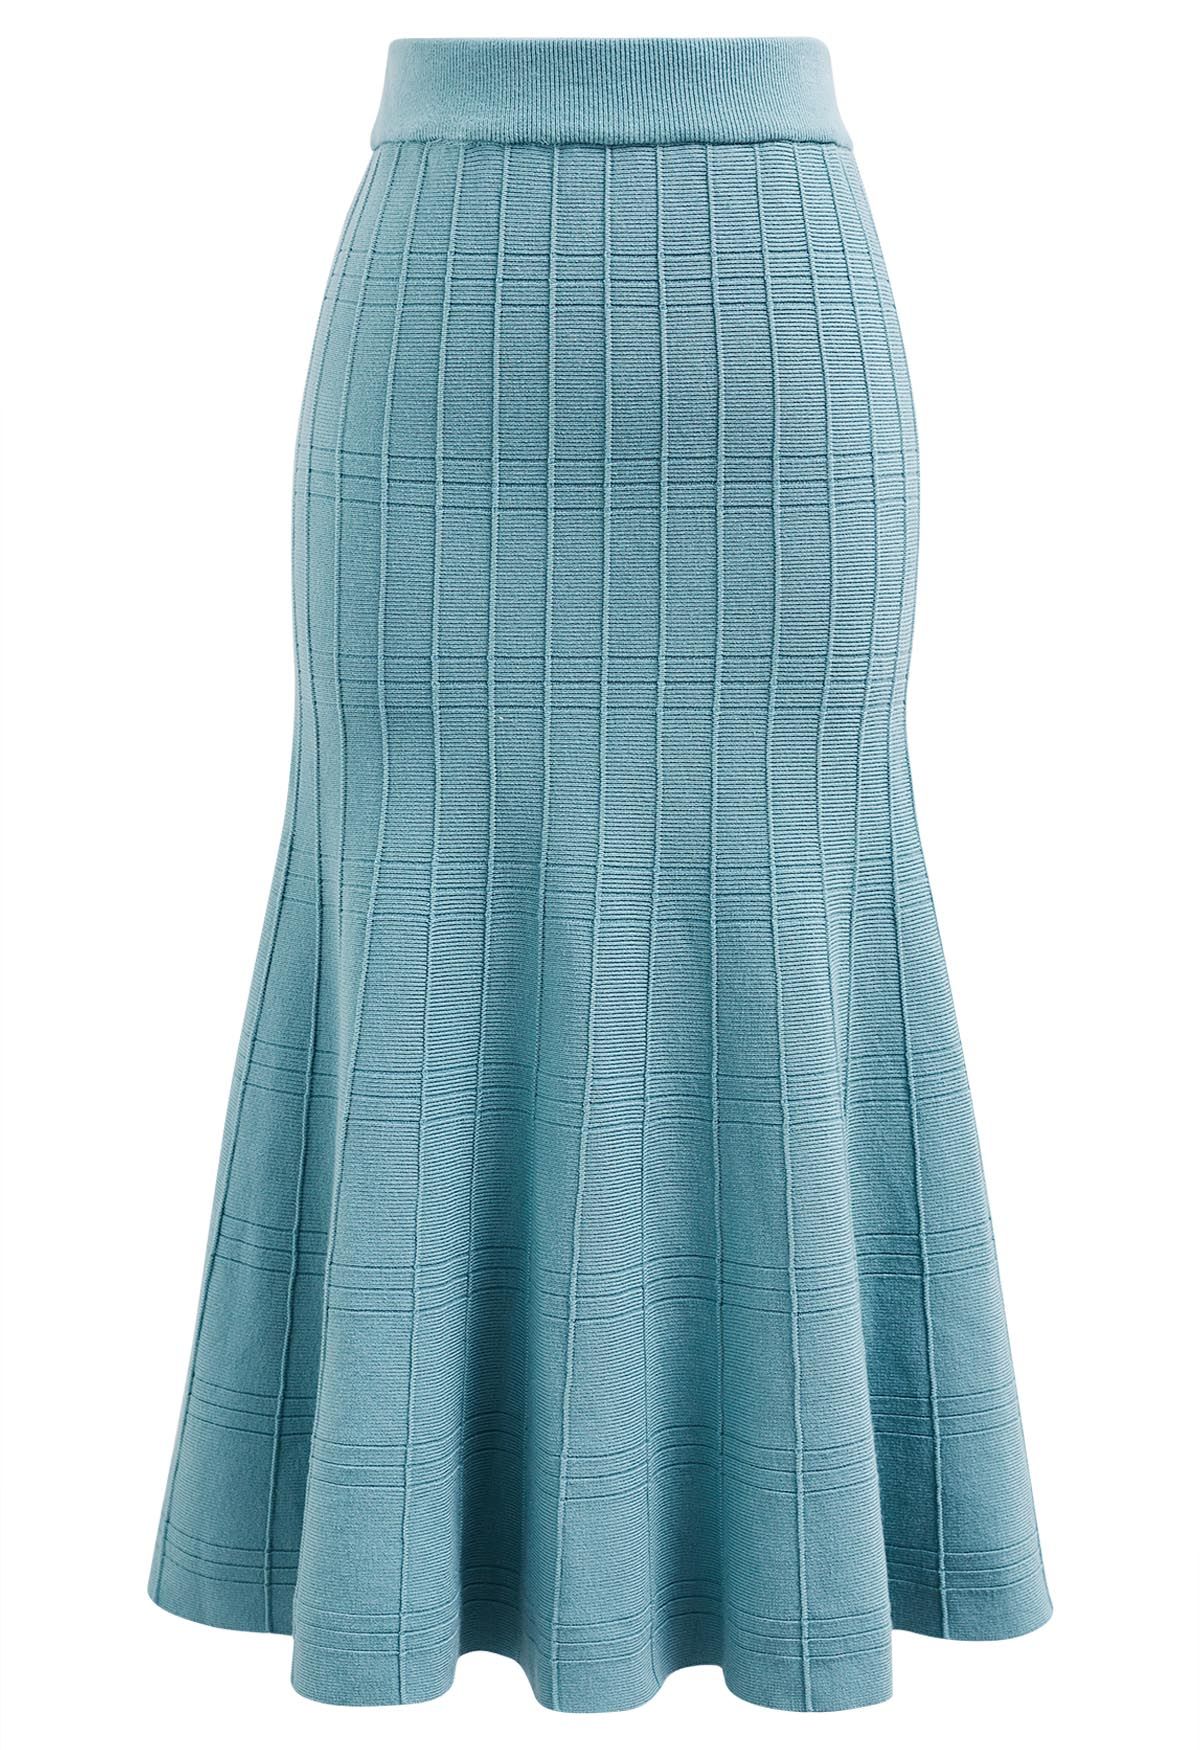 Seam Line Knit Mermaid Skirt in Turquoise - Retro, Indie and